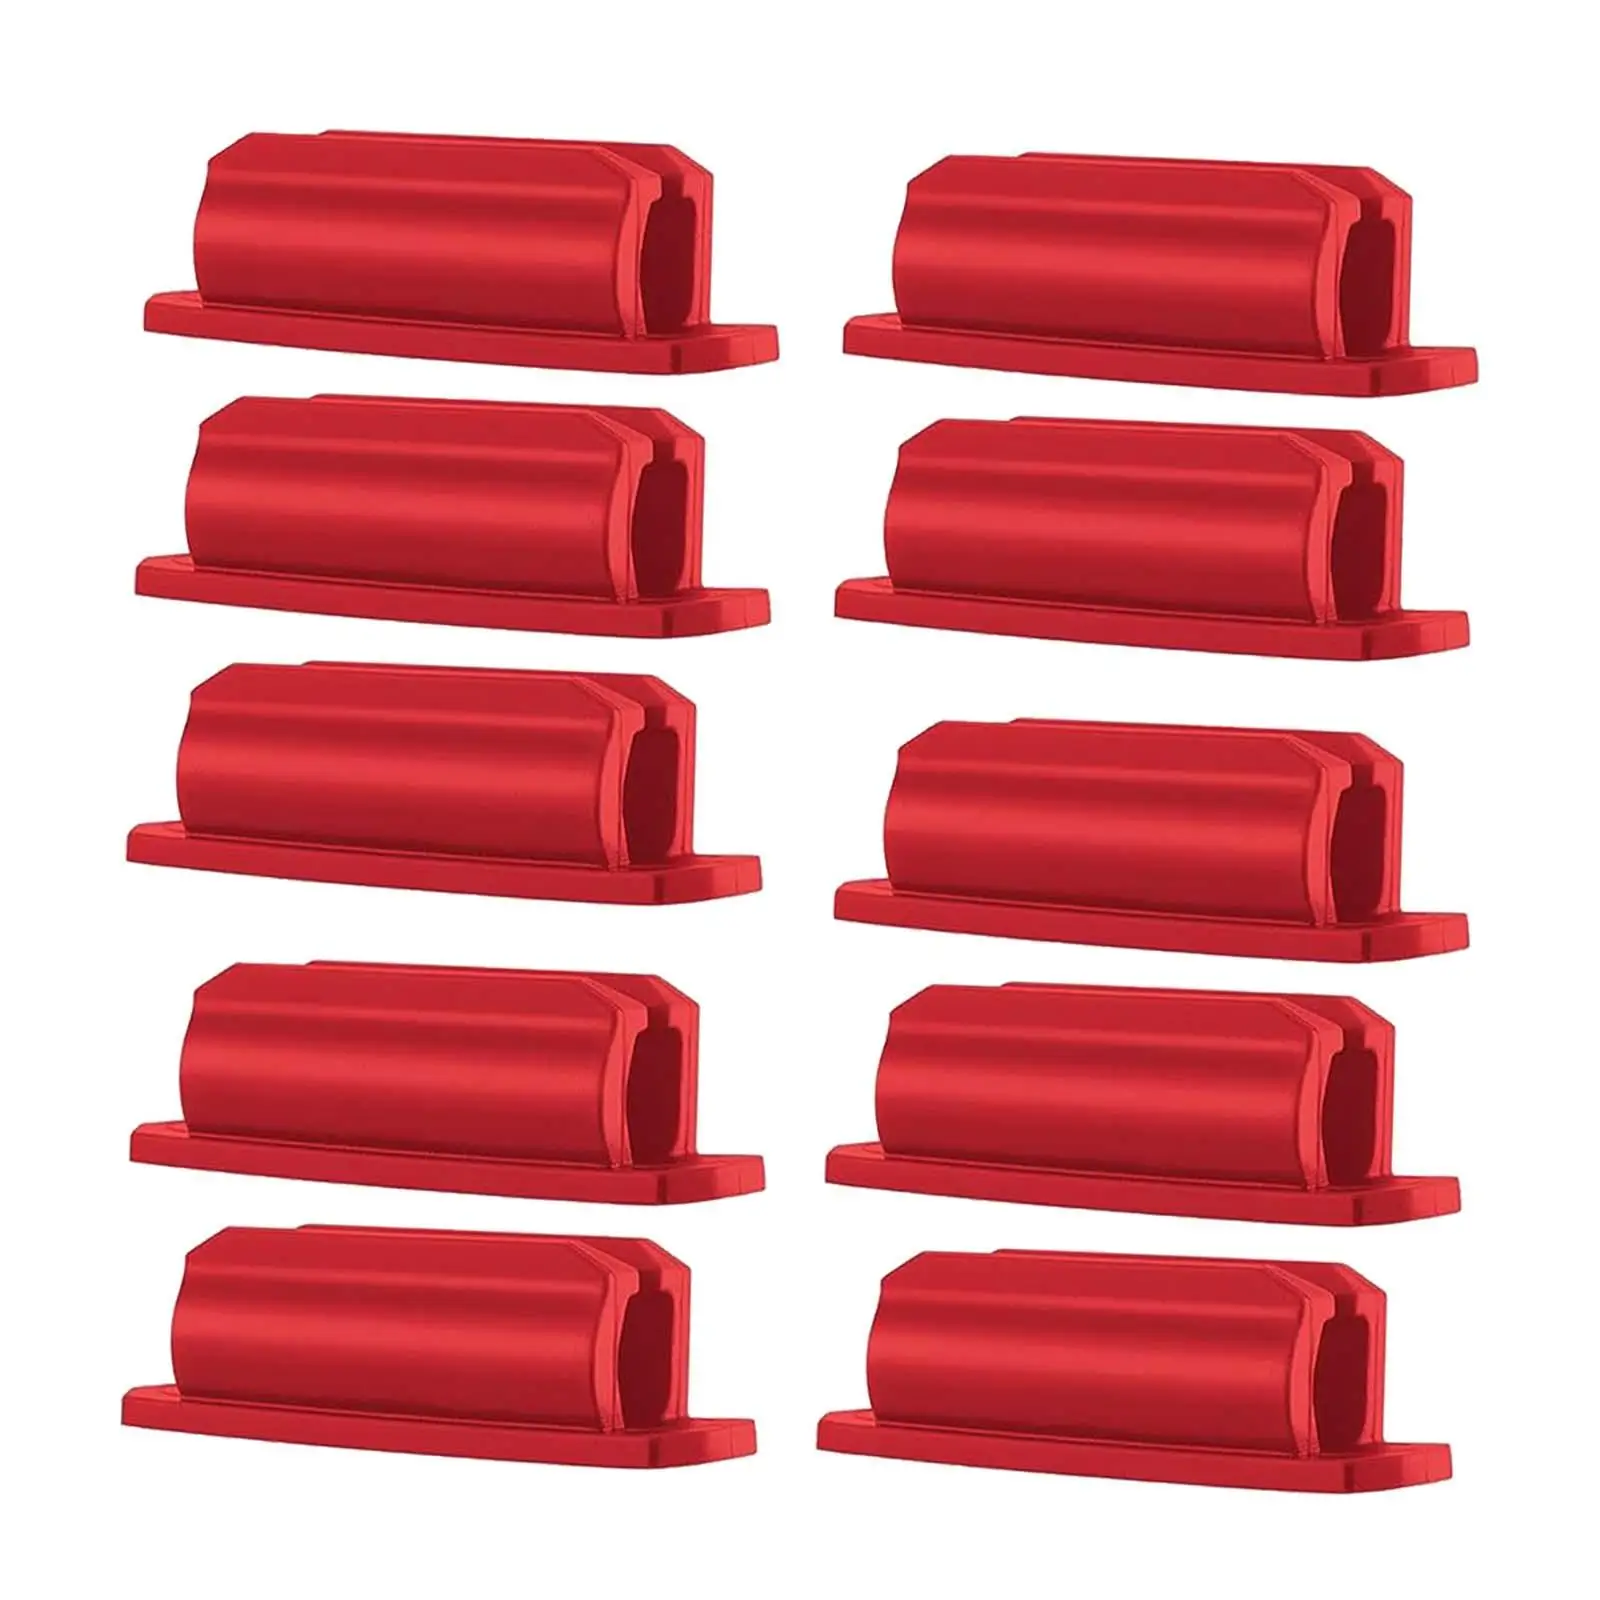 10x Sticky Silicone Pen Holder Pencil Clip for Clipboard Office for Car Computer Clipboards Bulletin Board Desktop Accessories